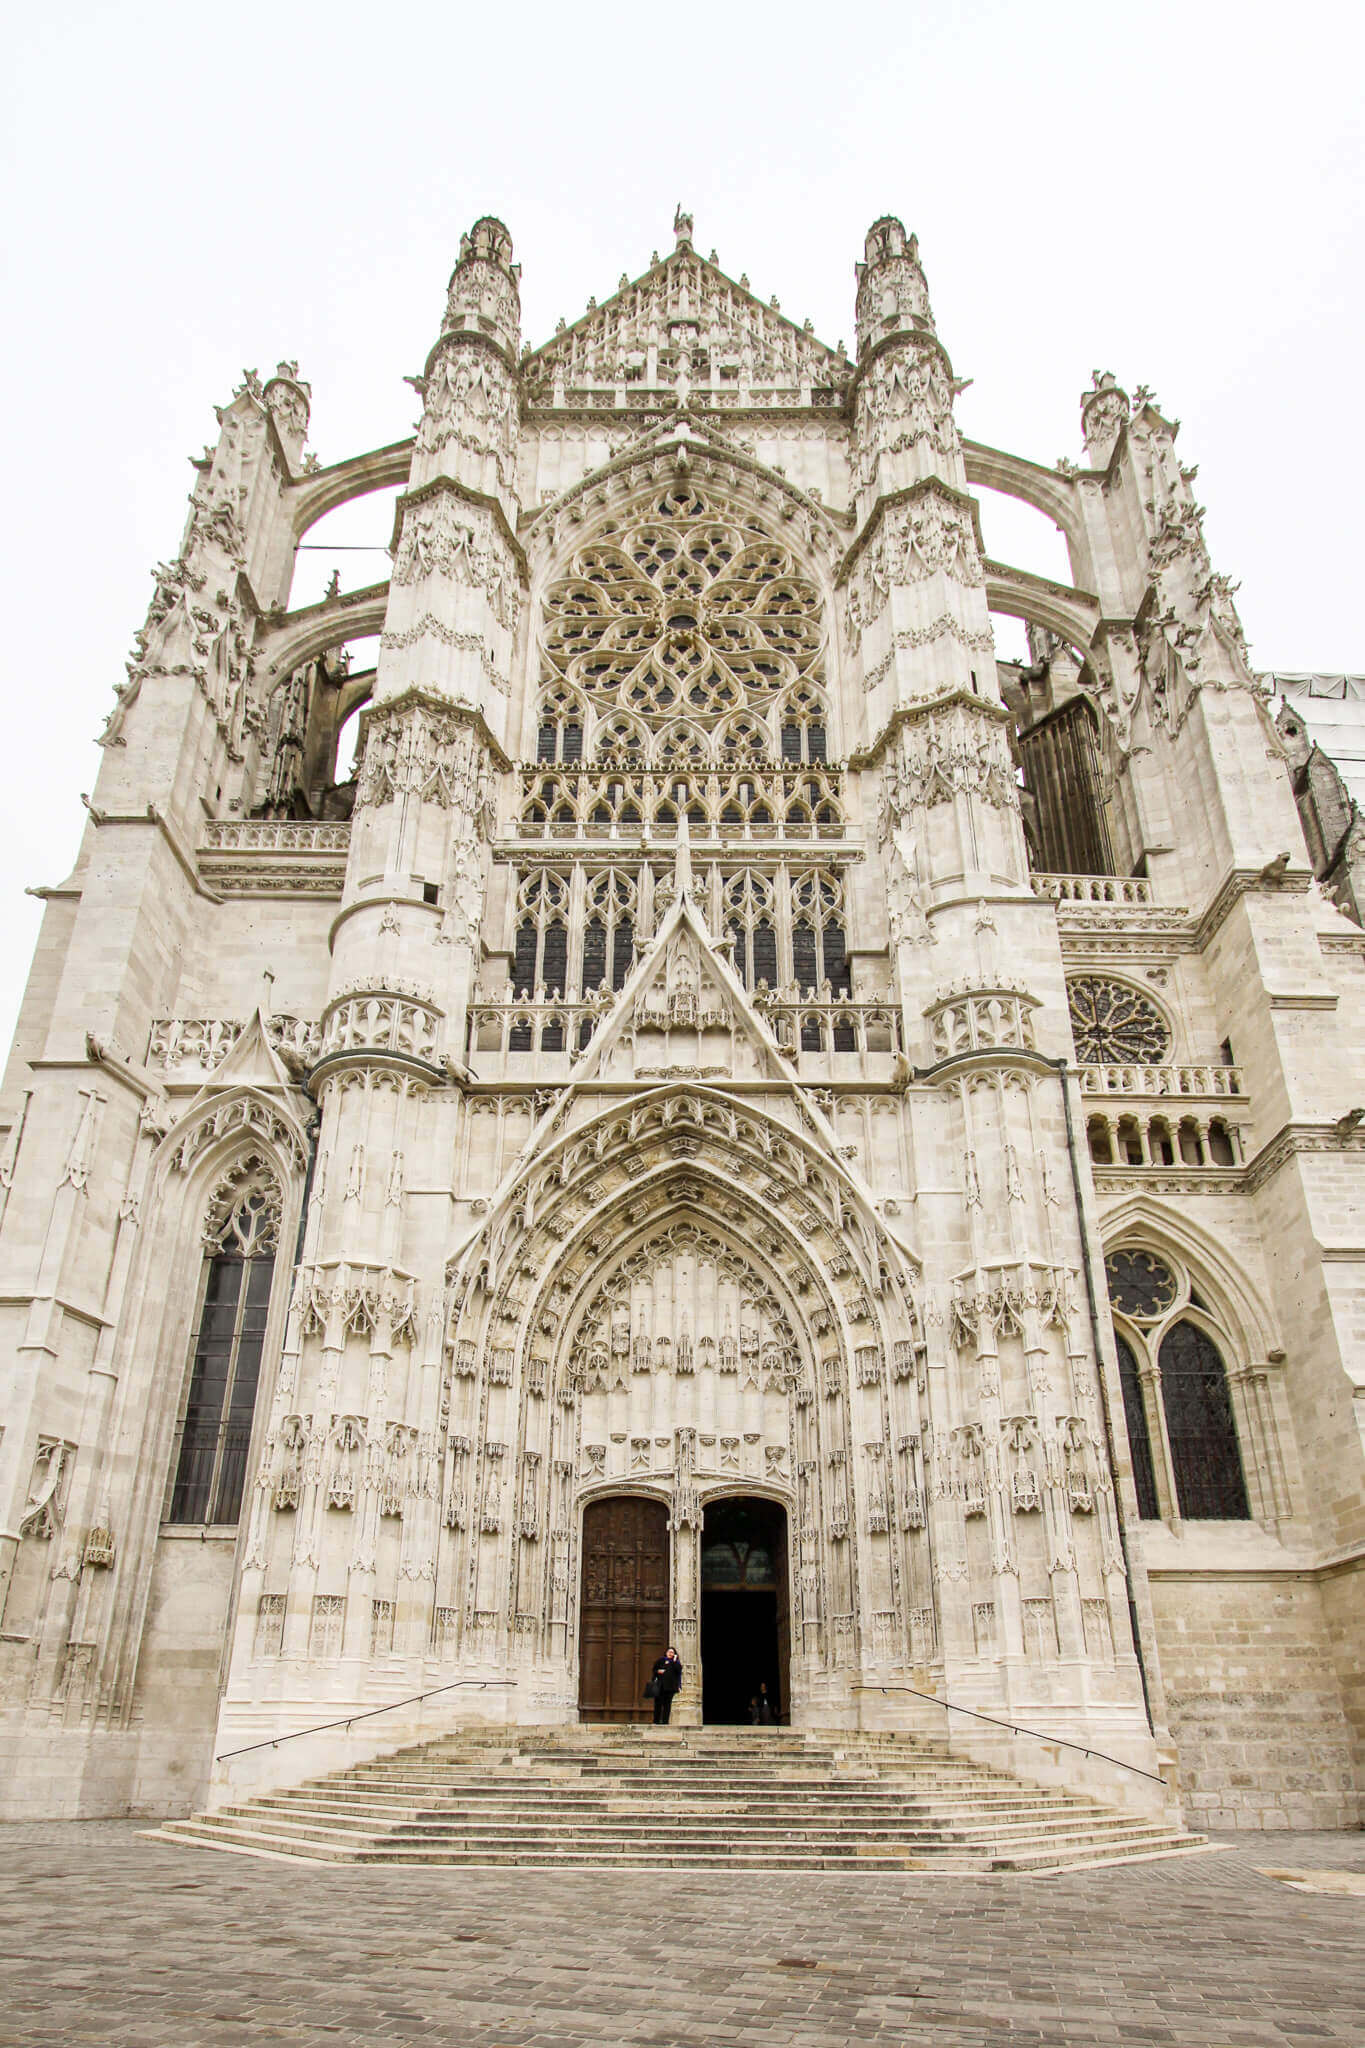 Facade of the ambitious Beauvais Cathedral